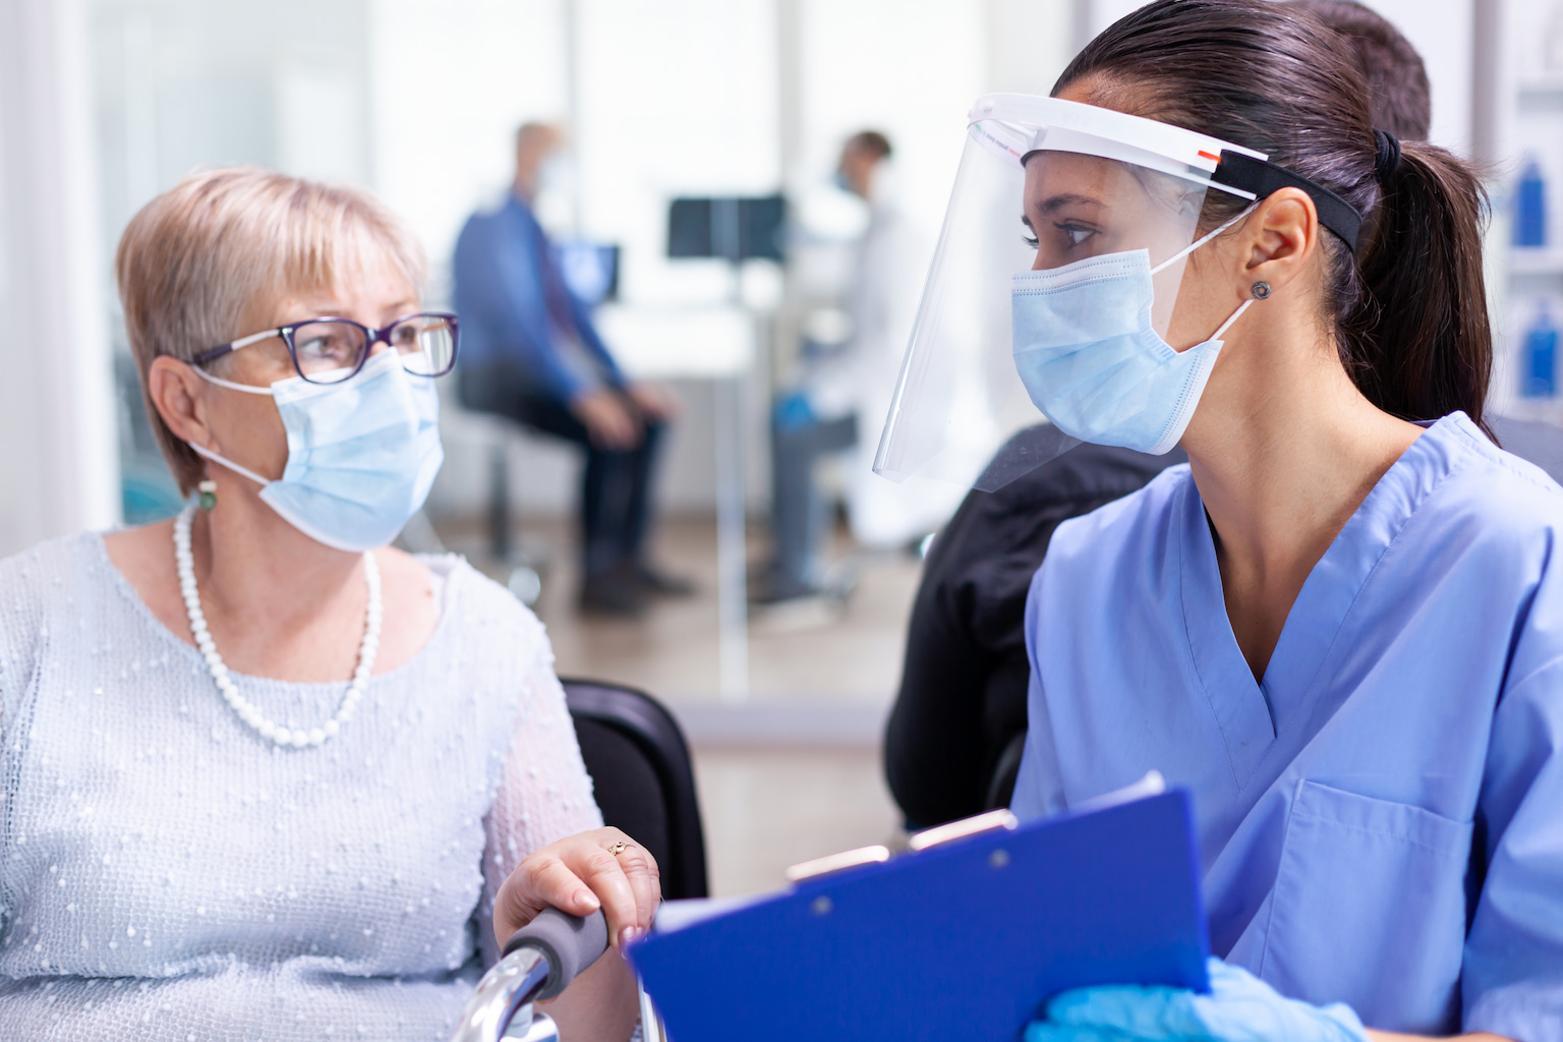 two people sitting next to each other. One is in medical scrubs and they are both wearing masks. 